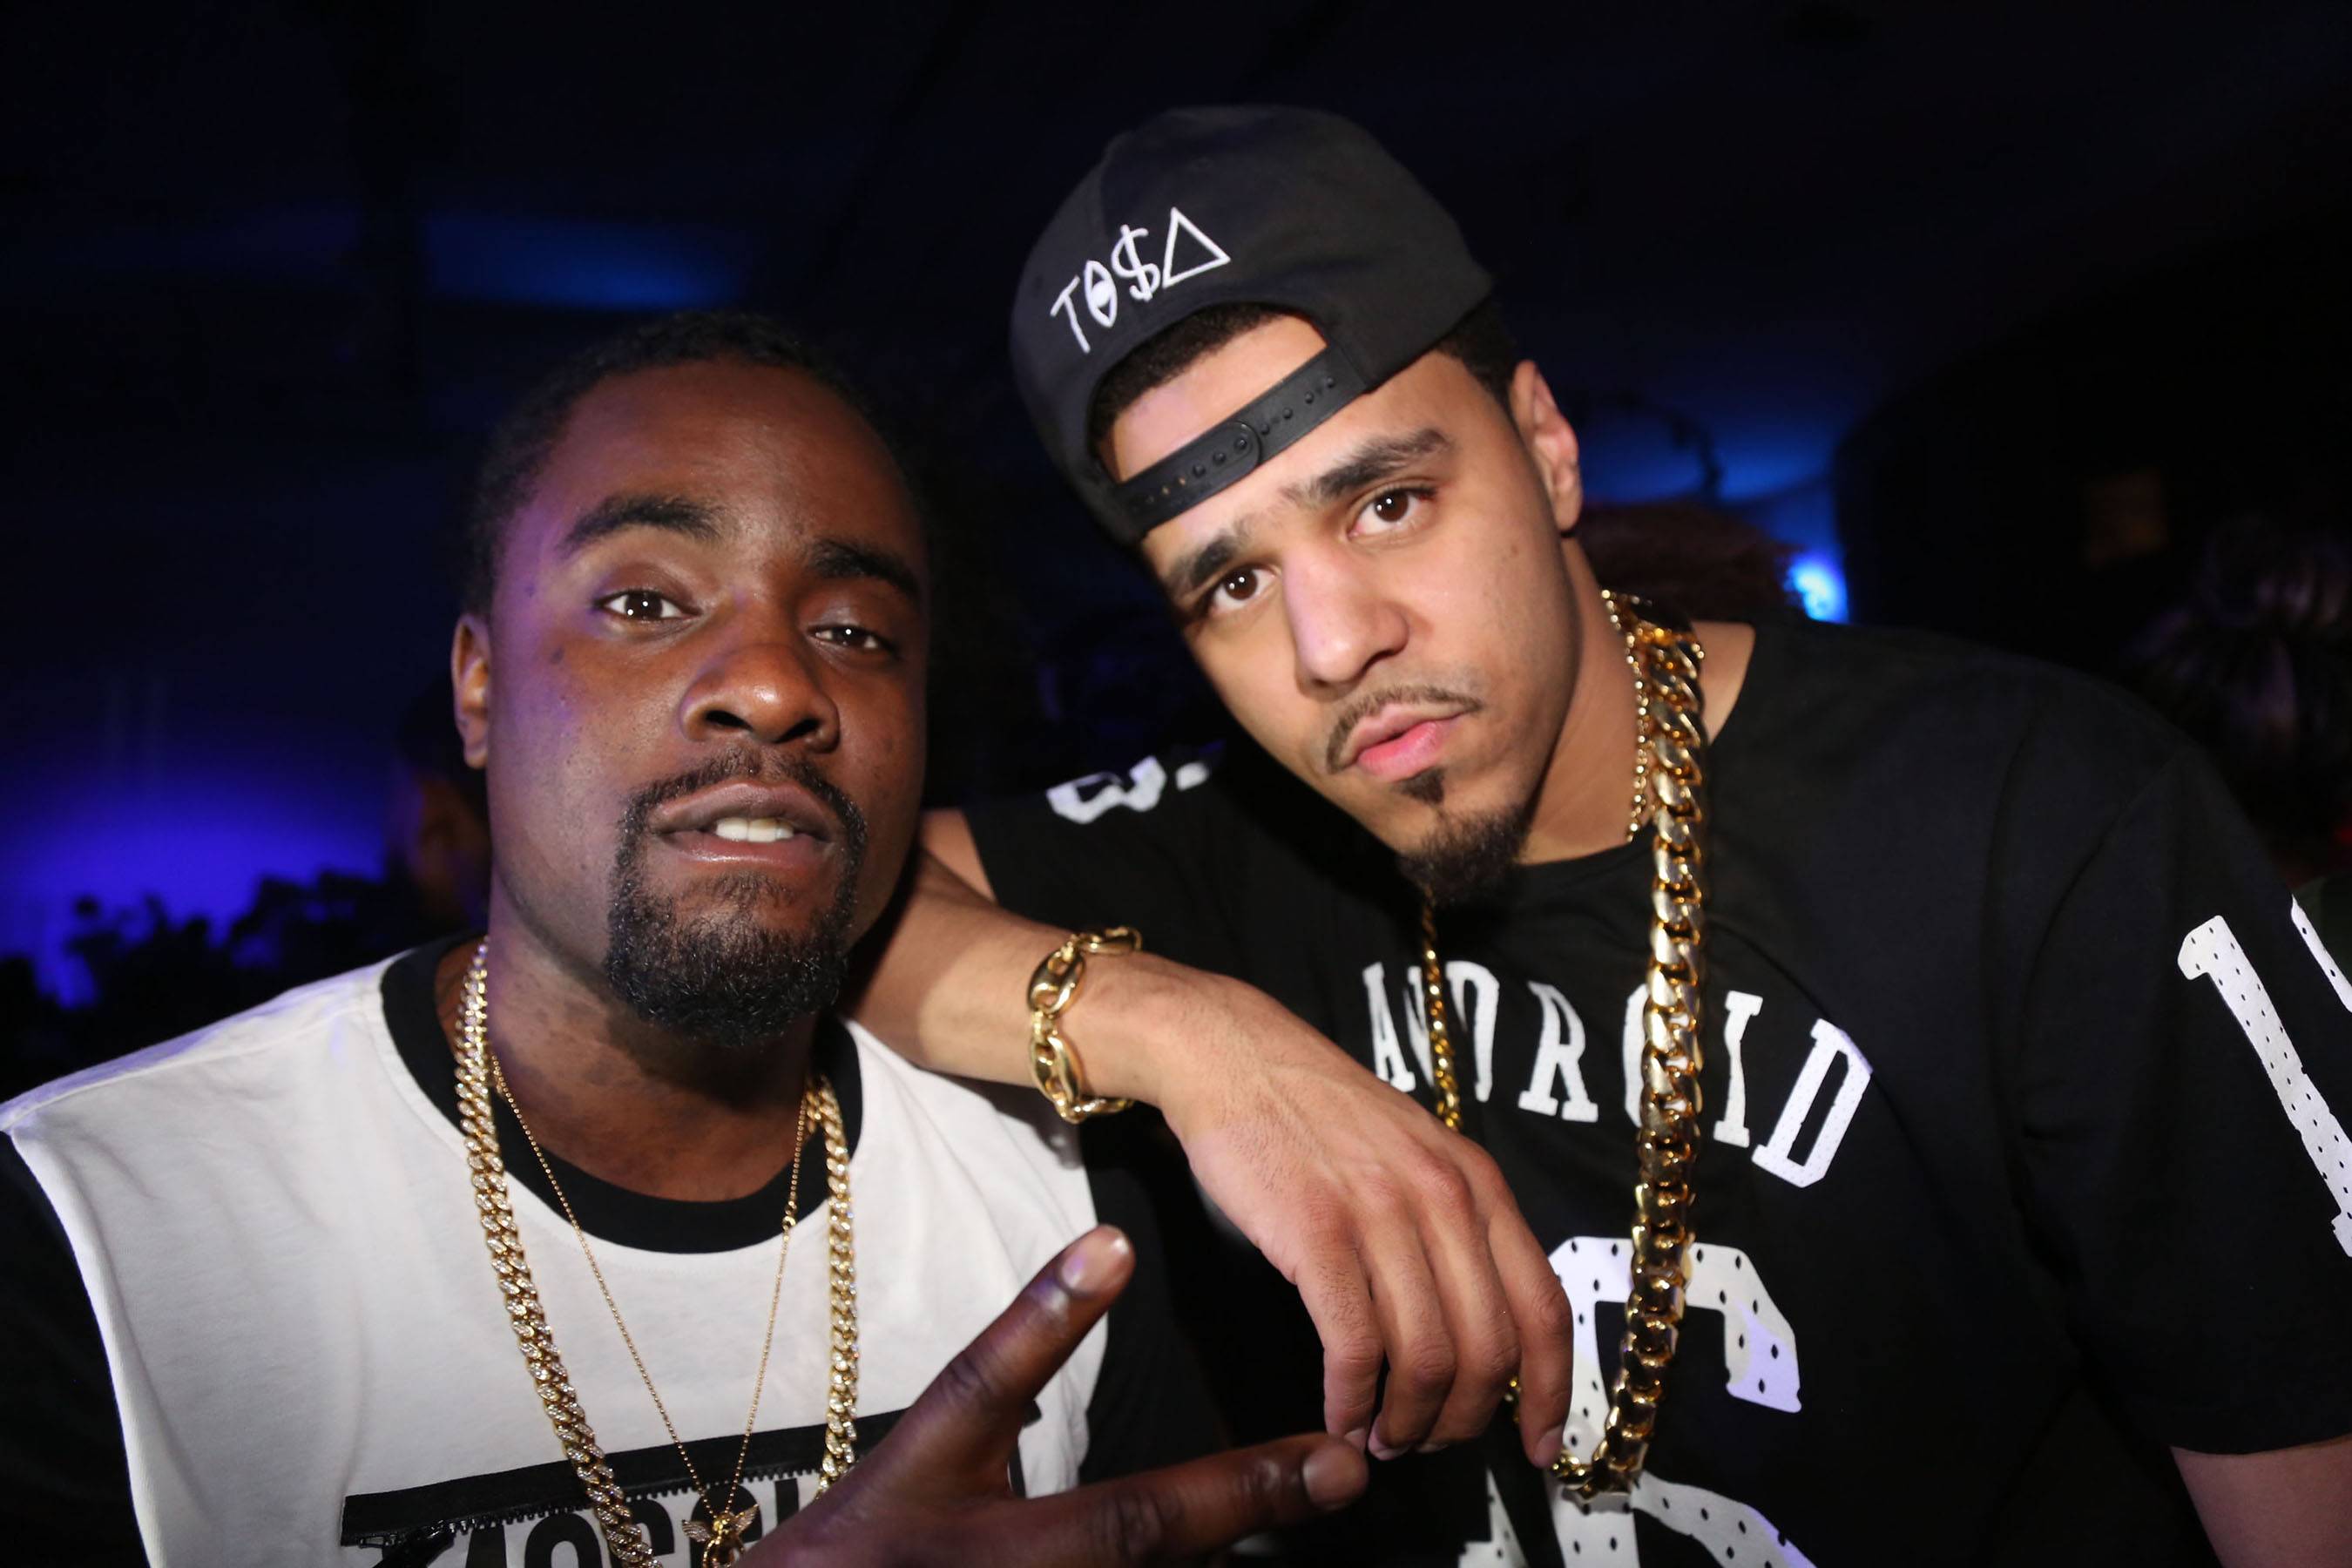 Wale Has A Friend In J.Cole - There's Drake and Lebron, Drake and Shaq, Drake and the NBA Association, and now Wale and Cole. Bromance in rap game is budding and Wale is not ashamed to gush over his friendship with the 2014 Forrest Hills Drive rapper. &quot;I love that dude. I have no friend like him and he has no friend like me,&quot; says Wale in a recent interview with MTV. The two buds have been friends before the music and Wale says thats more important than any &quot;industry&quot; thing.&nbsp;(Photo: Johnny Nunez/WireImage)